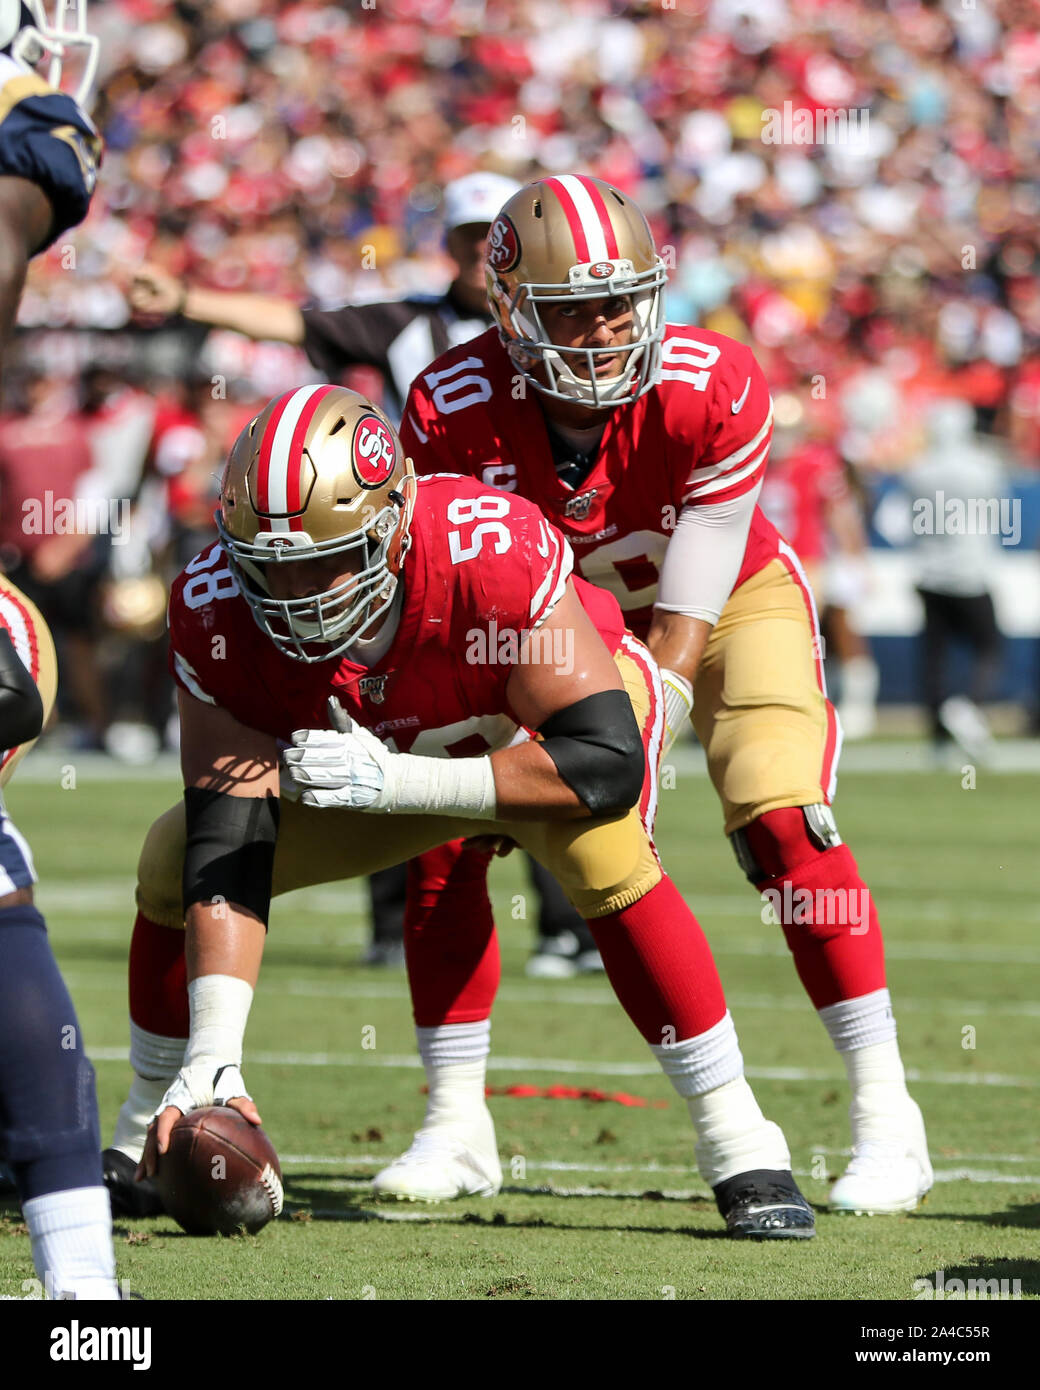 Los Angeles, CA. 13th Oct, 2019. San Francisco 49ers quarterback Jimmy  Garoppolo #10 under center during the NFL game between San Francisco 49ers  vs Los Angeles Rams at the Los Angeles Memorial